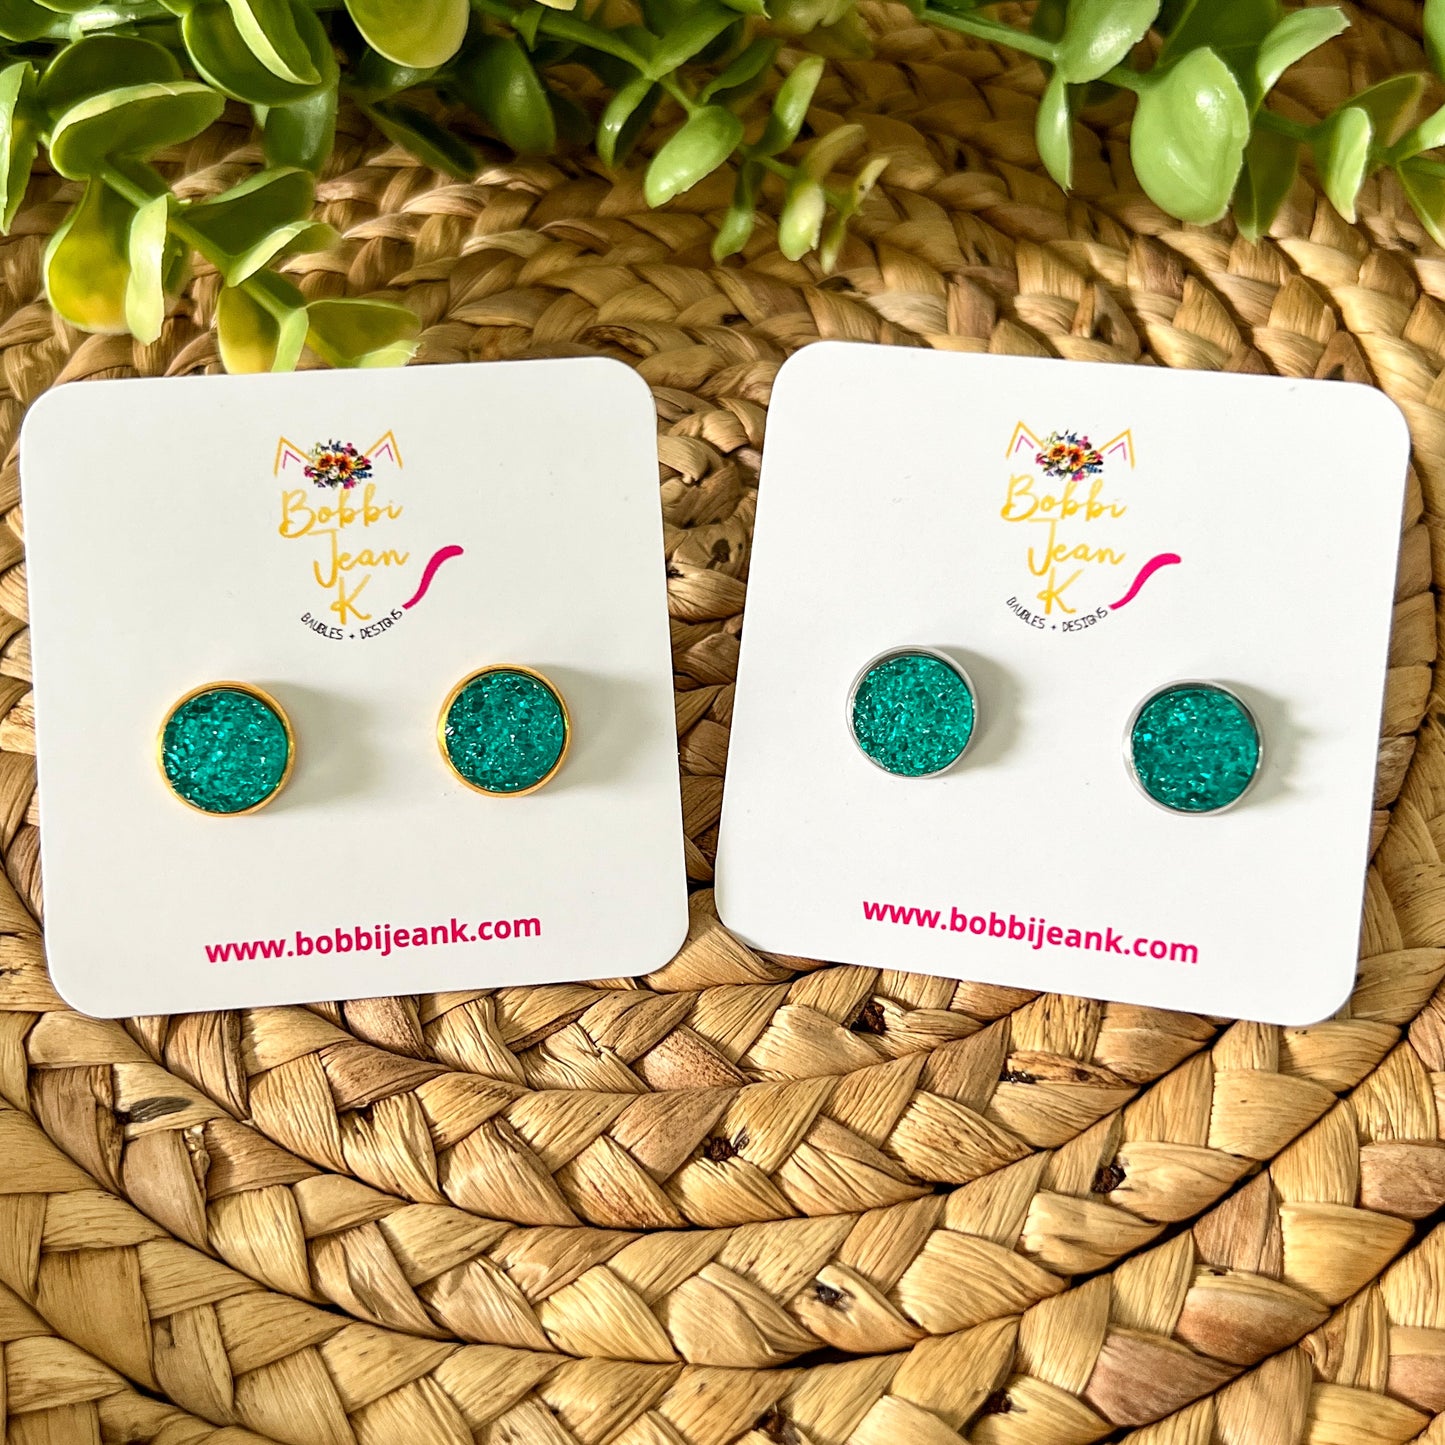 Turquoise "Ice" Faux Druzy Studs 12mm: Choose Silver or Gold Settings